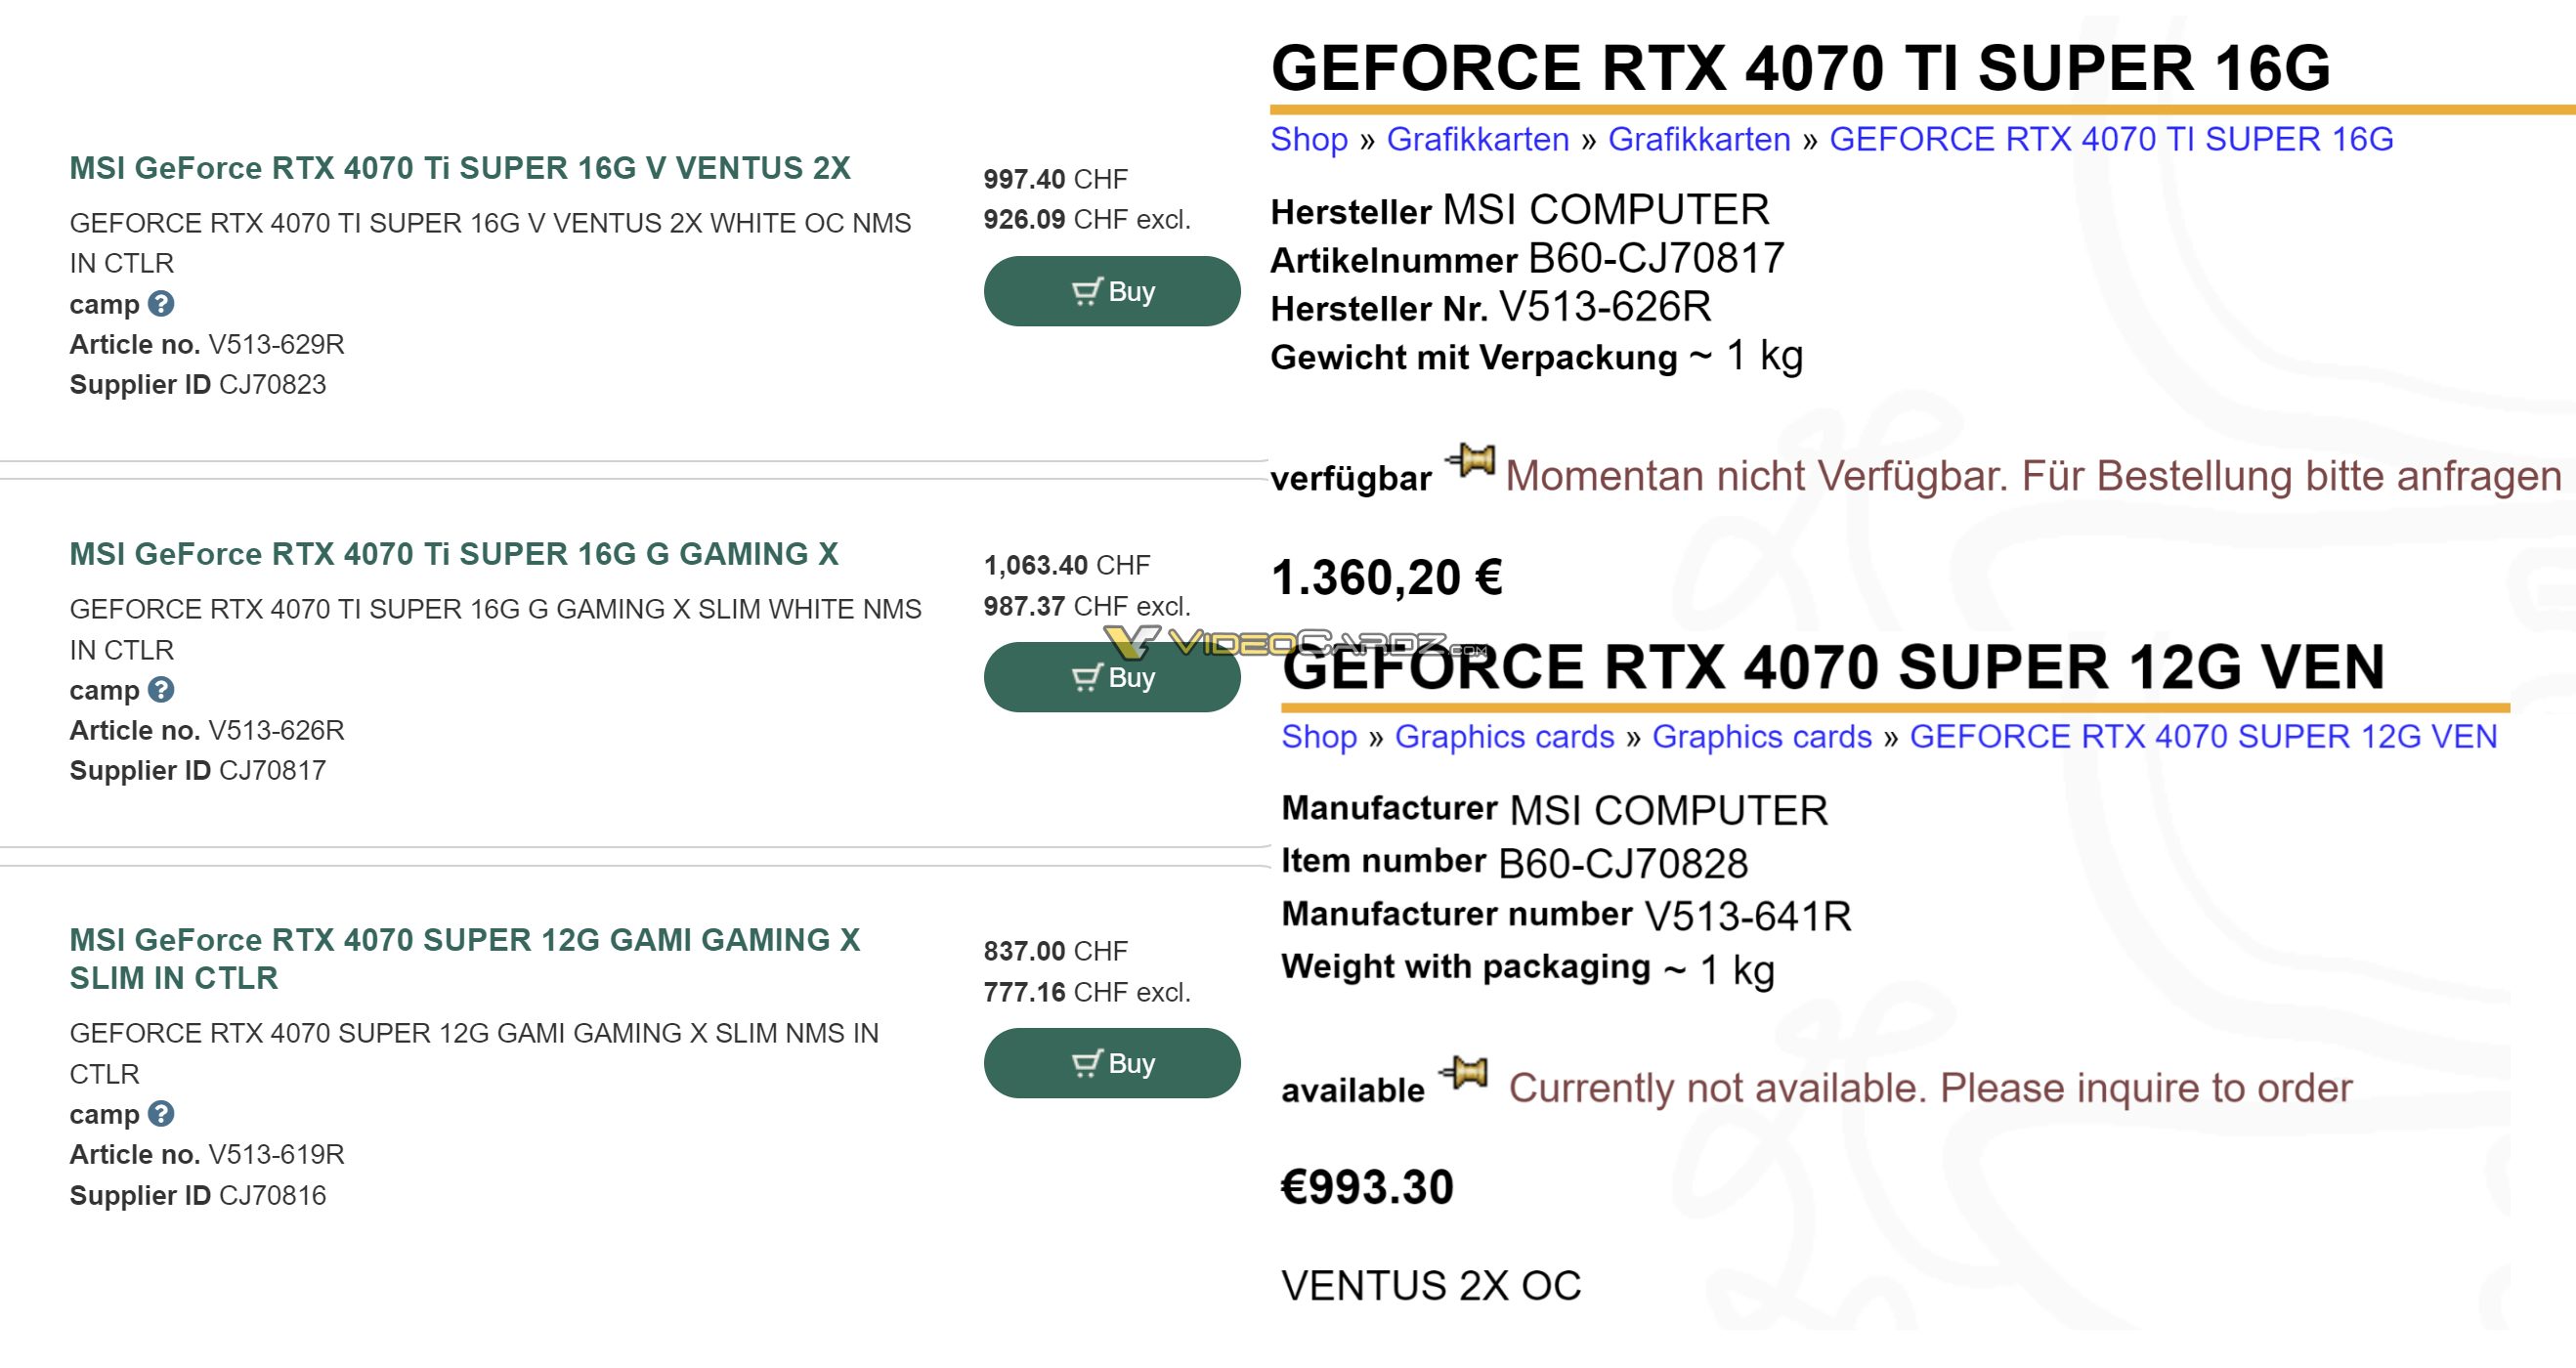 Where to Buy AMD Ryzen 7 5700X3D & Pre Order details US, UK, Canada